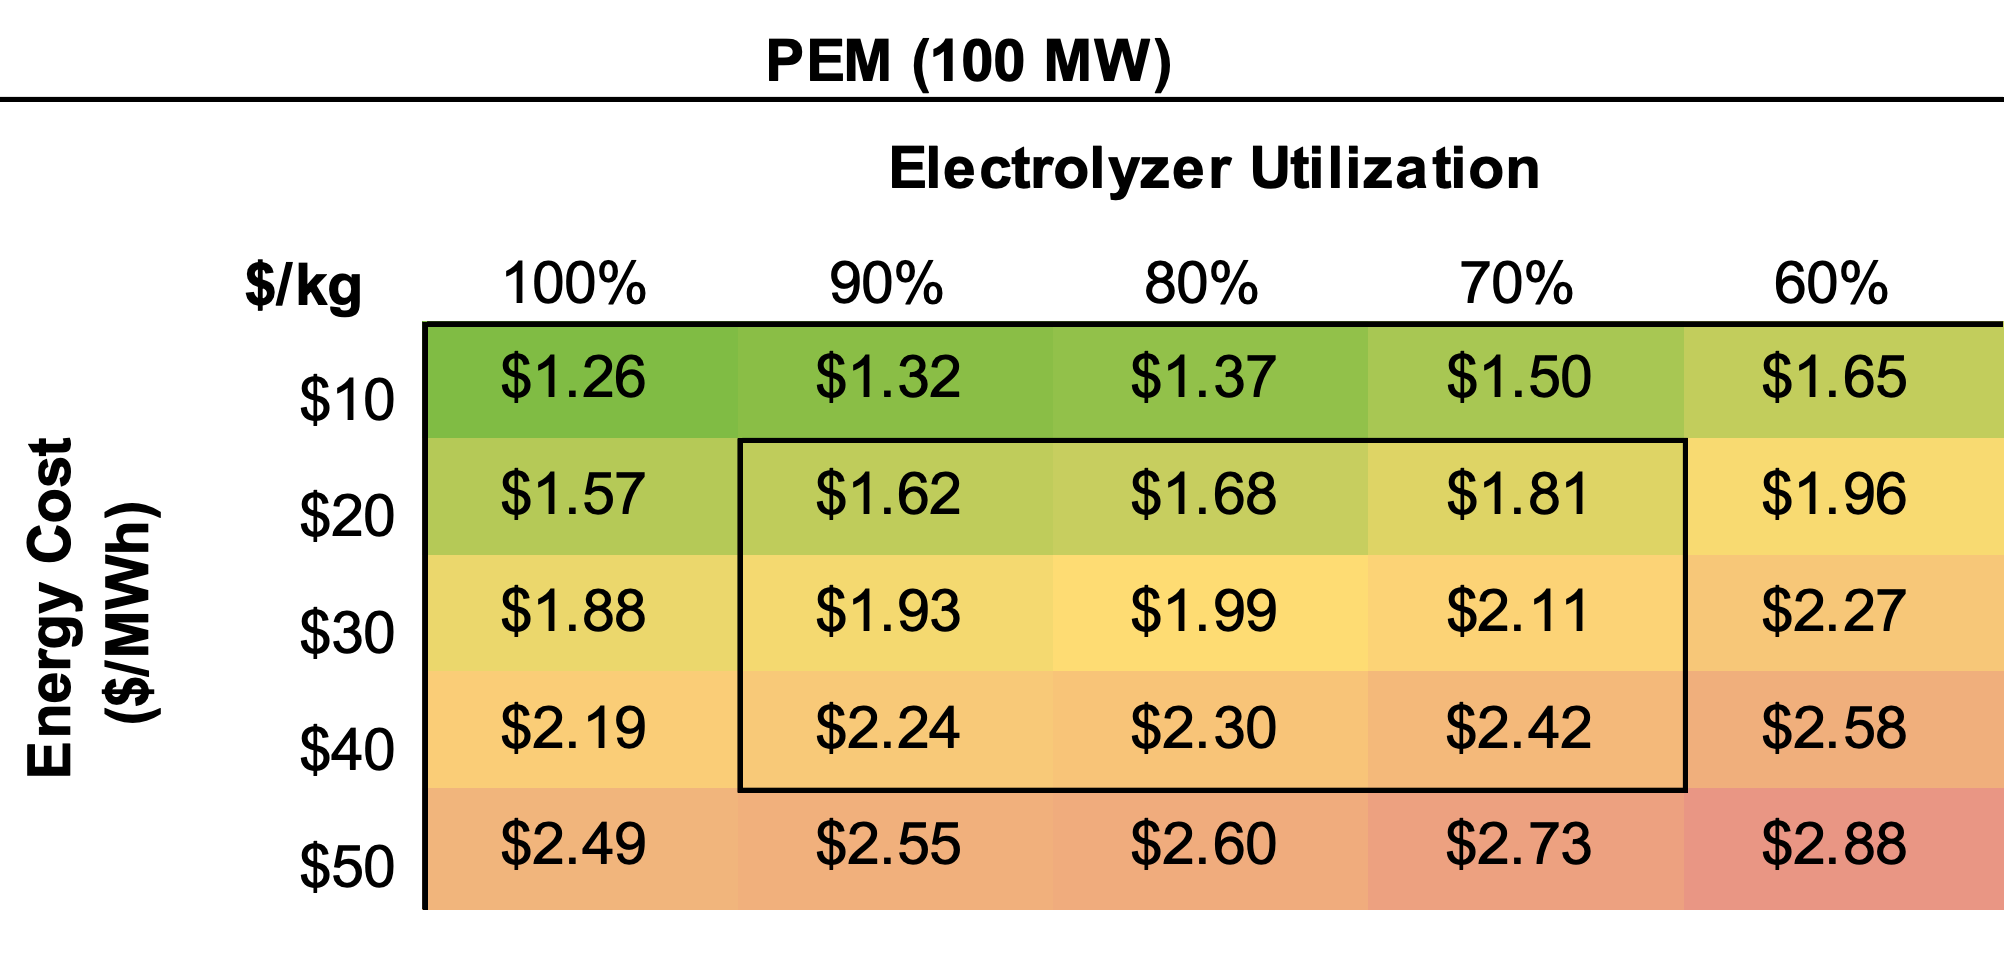 Price sensitivity of hydrogen manufacturing to utilization and cost of electricity, image courtesy Lazard